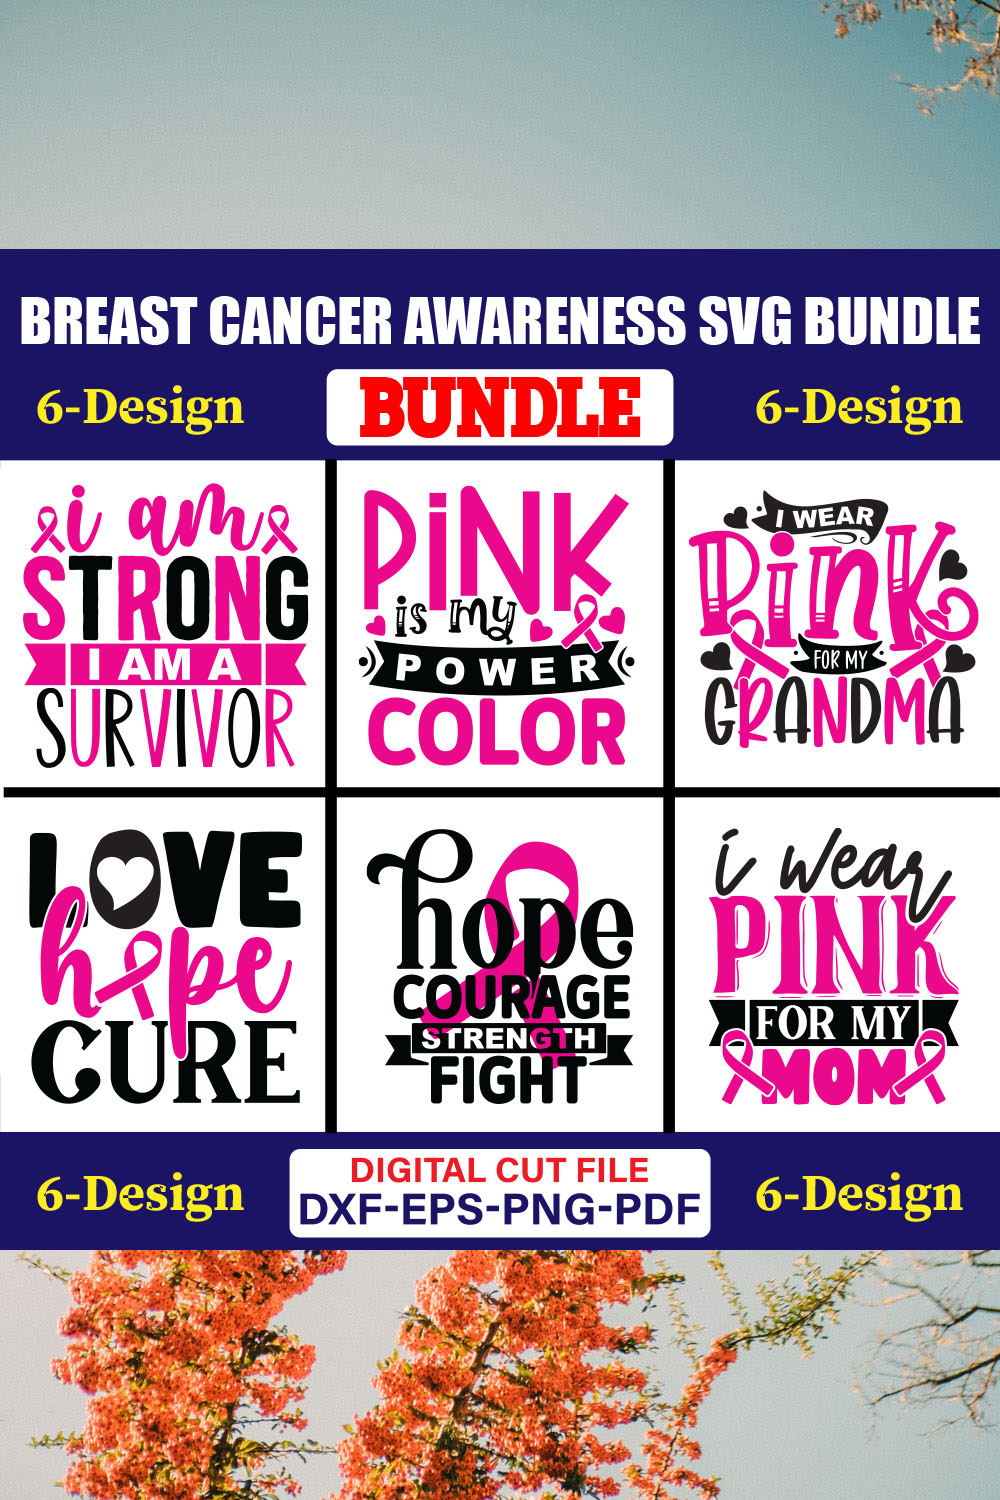 VTD Official Strength Dignity Laughs Breast Cancer Awareness Gift SVG T Shirt Design.